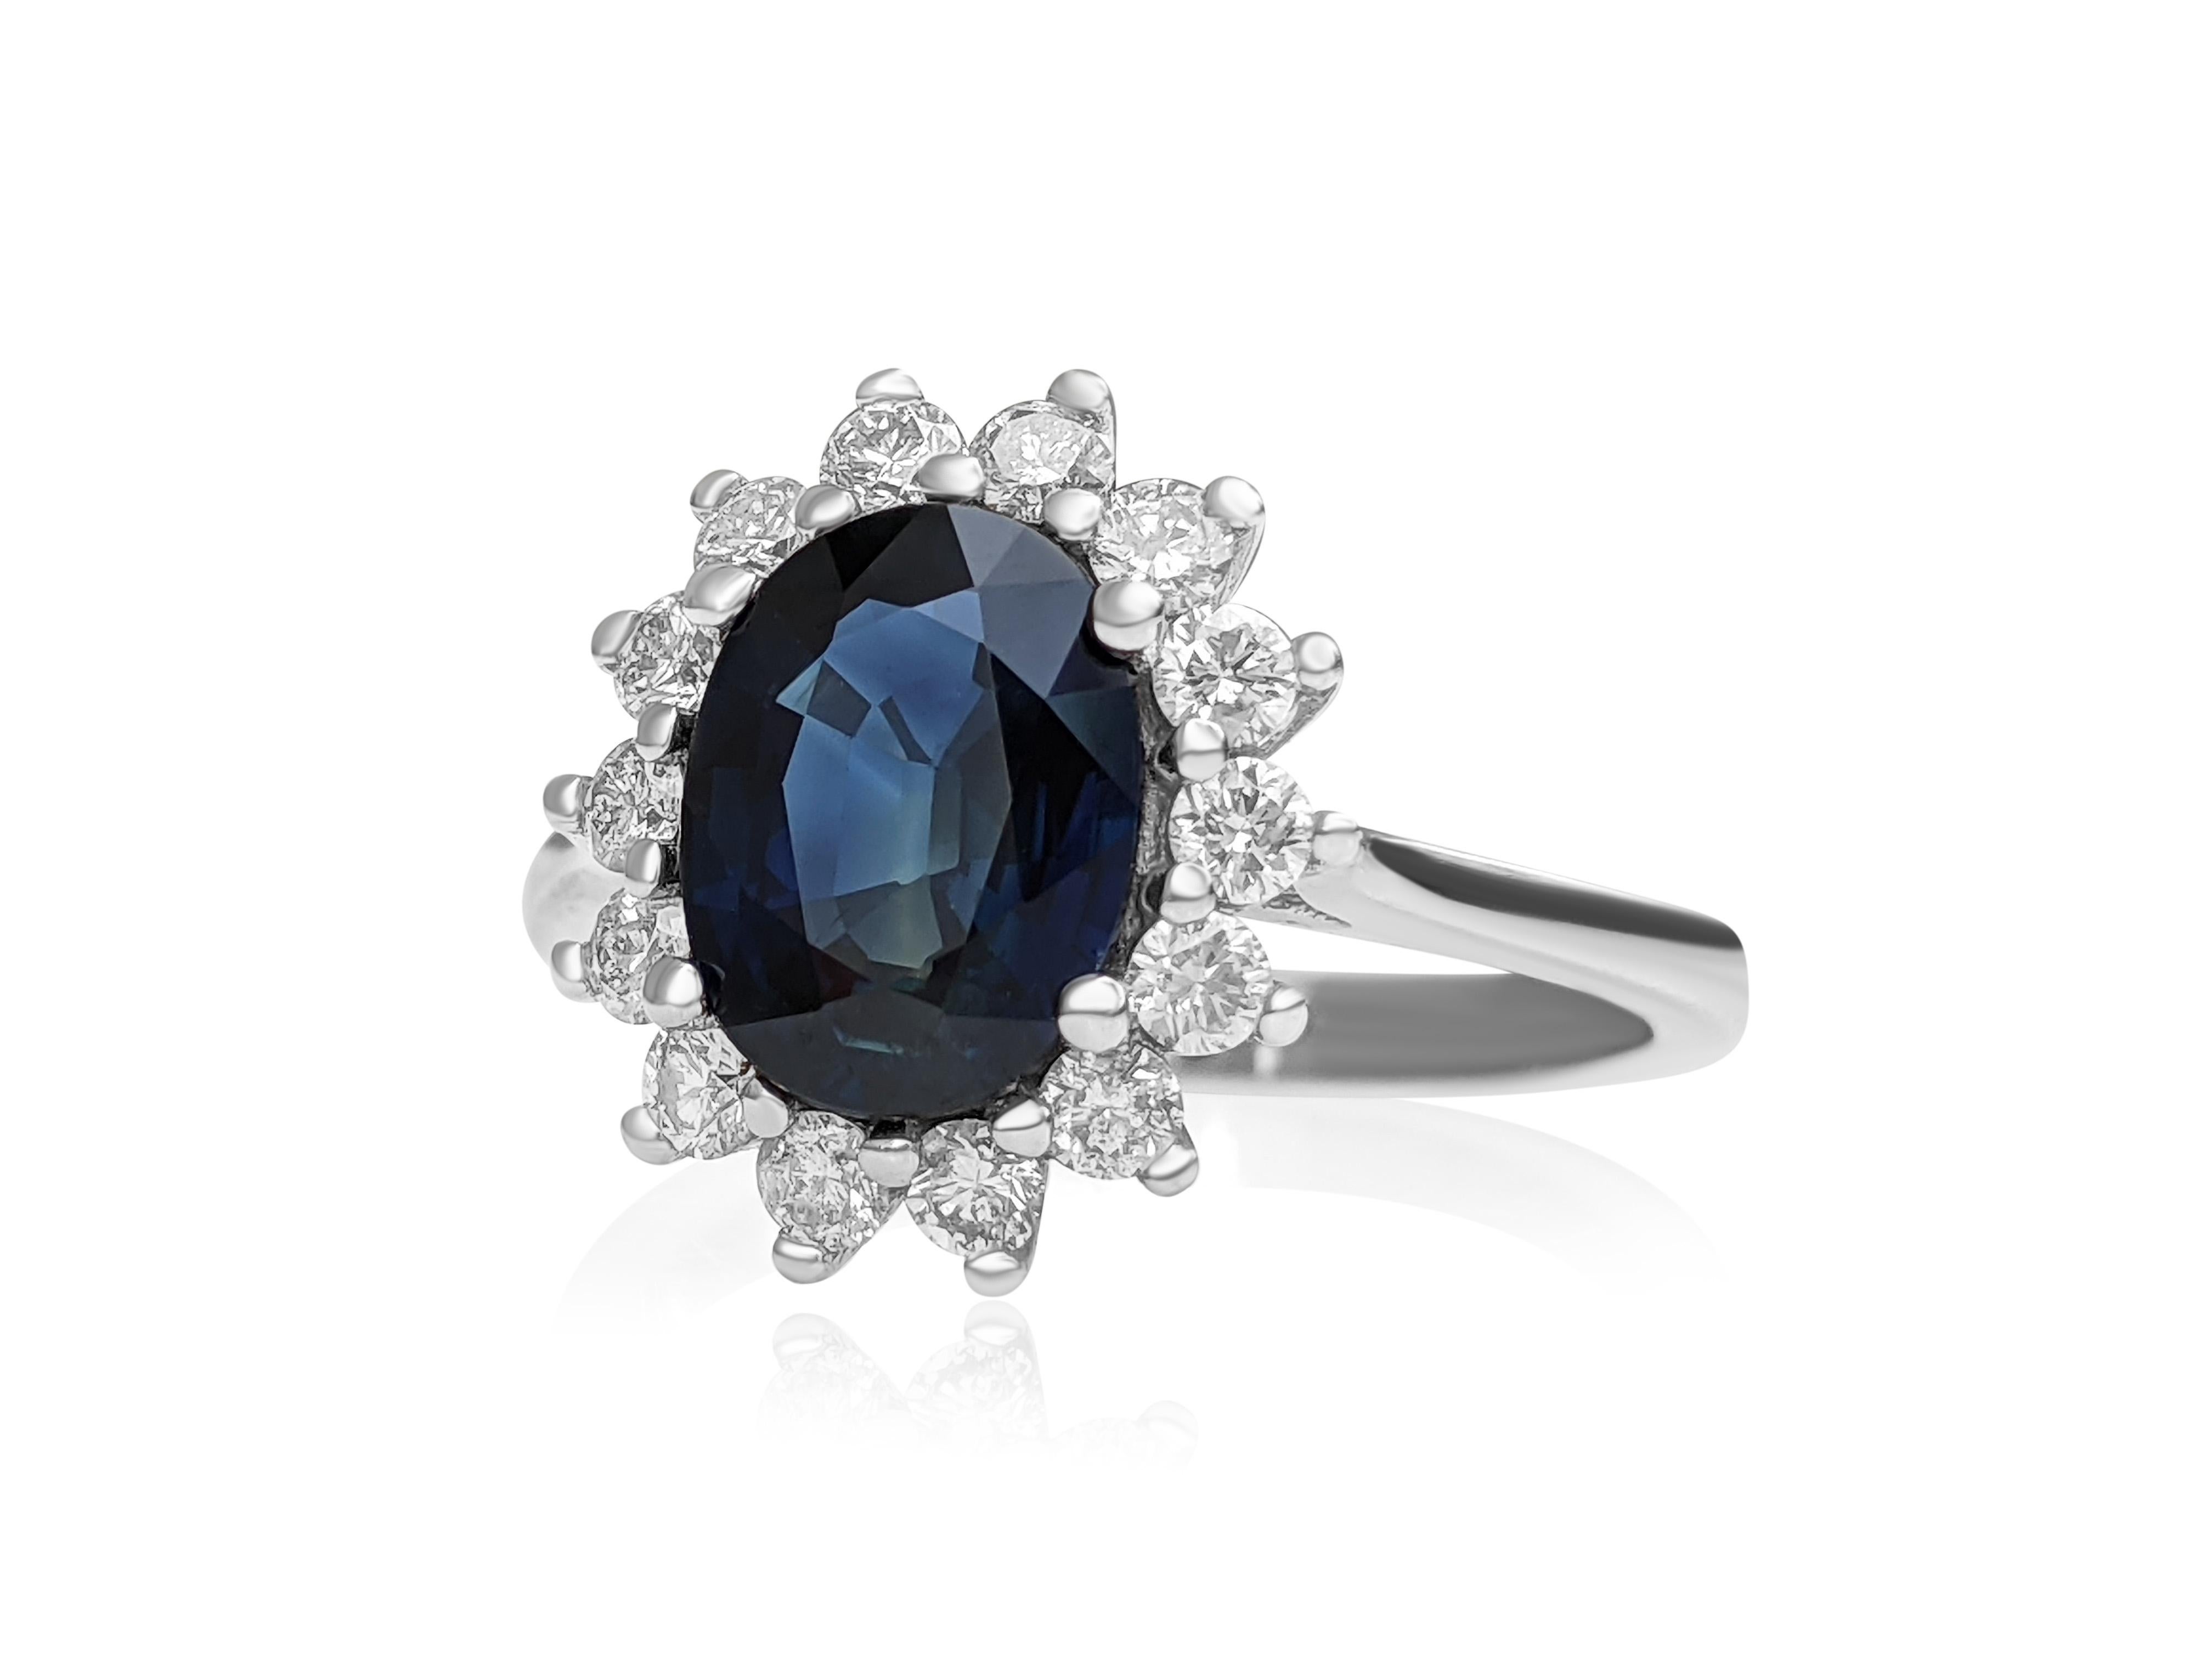 Women's $1 No Reserve! - 1.99 Carat Sapphire and 0.50ct Diamonds, 14kt White Gold Ring